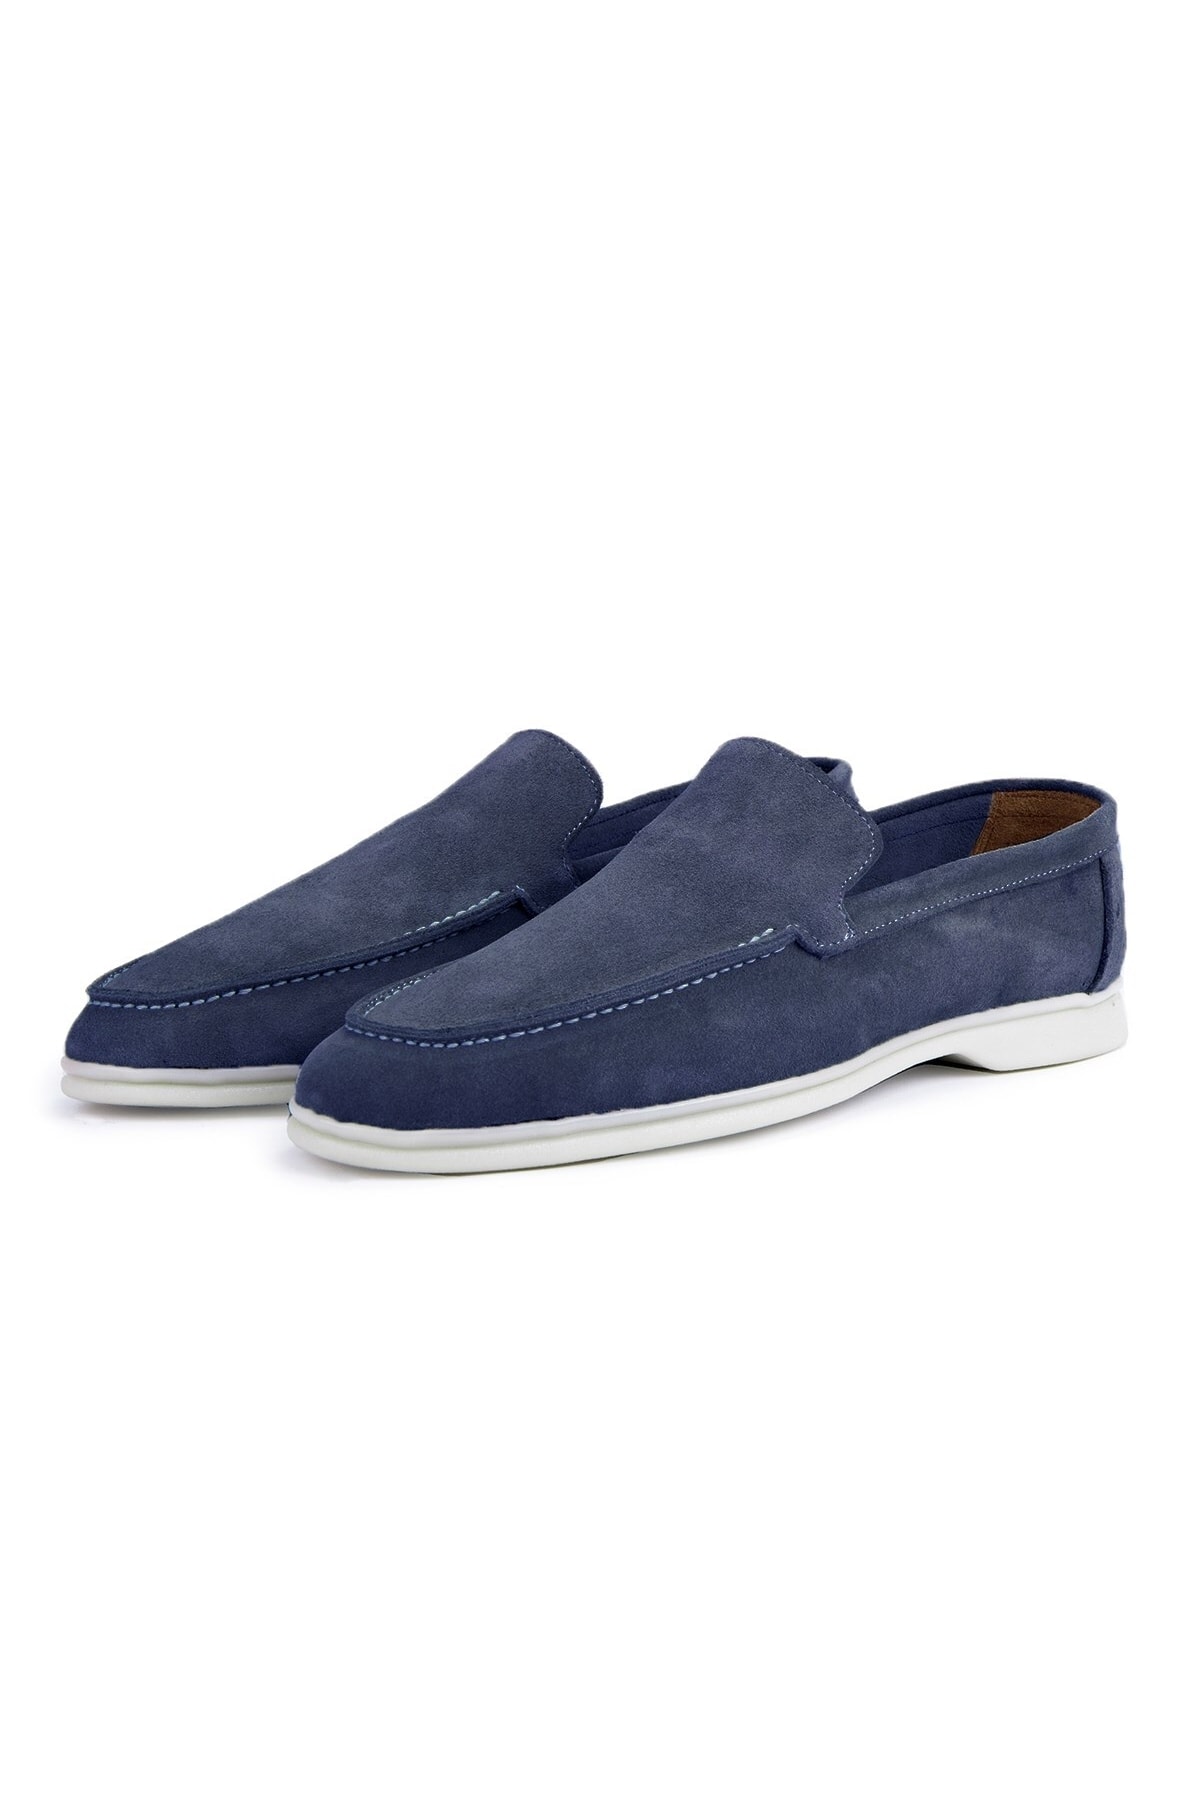 Ducavelli Facile Suede Genuine Leather Men's Casual Shoes Loafers Shoes Navy Blue.